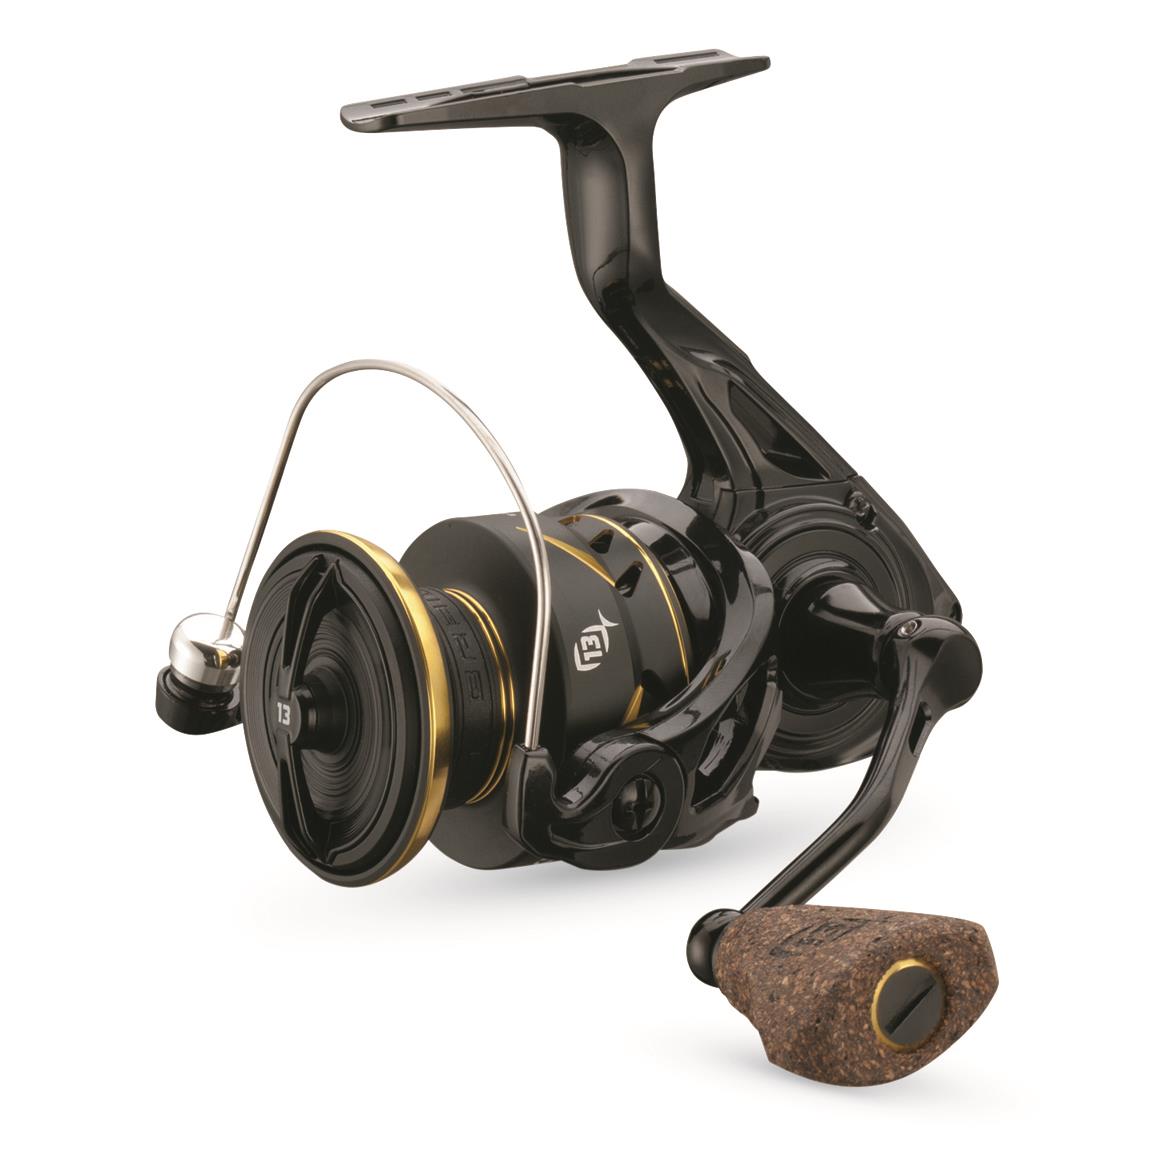 Pflueger Supreme Spinning Reel, Size 30, 5.2:1 Gear Ratio - 726934, Spinning  Reels at Sportsman's Guide